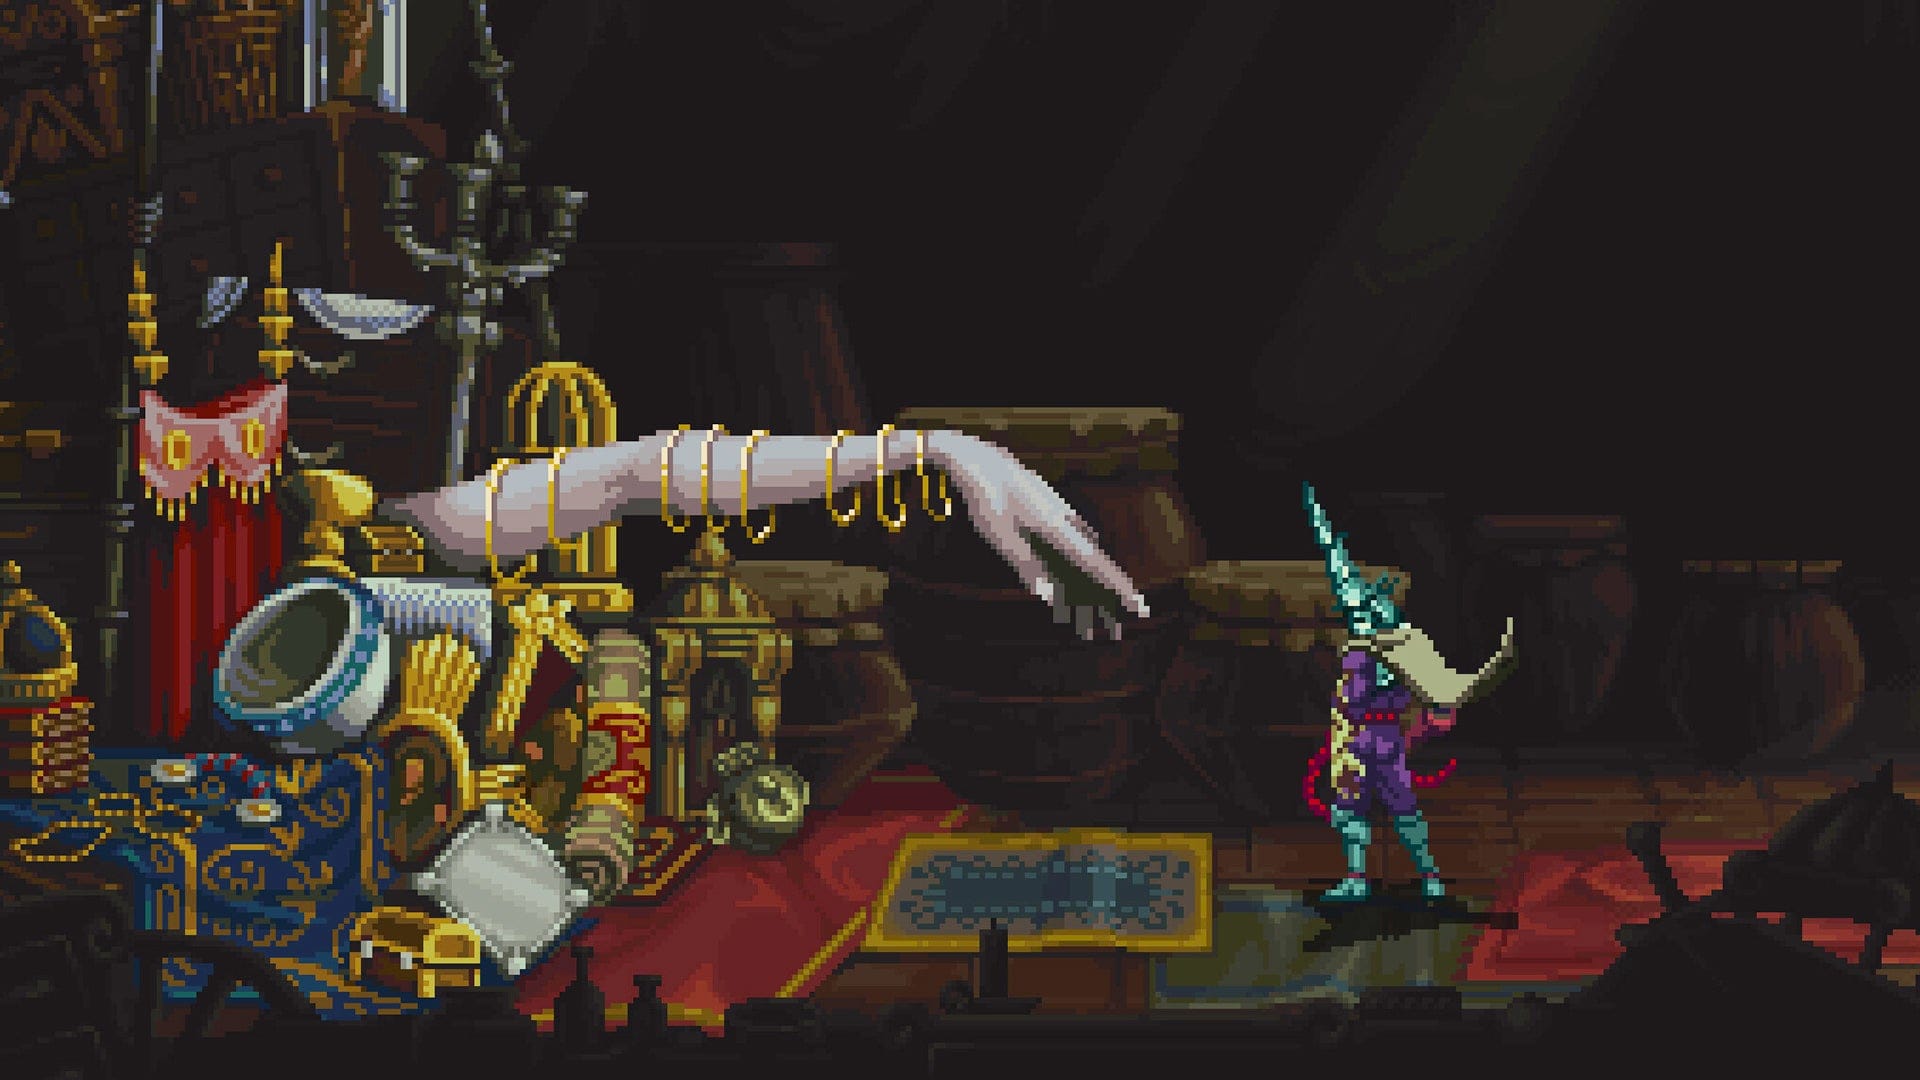 A screenshot with one of the merchants in the game, depicted as a womens gigantic hand reaching out from the pile of riches and expensive stuff.